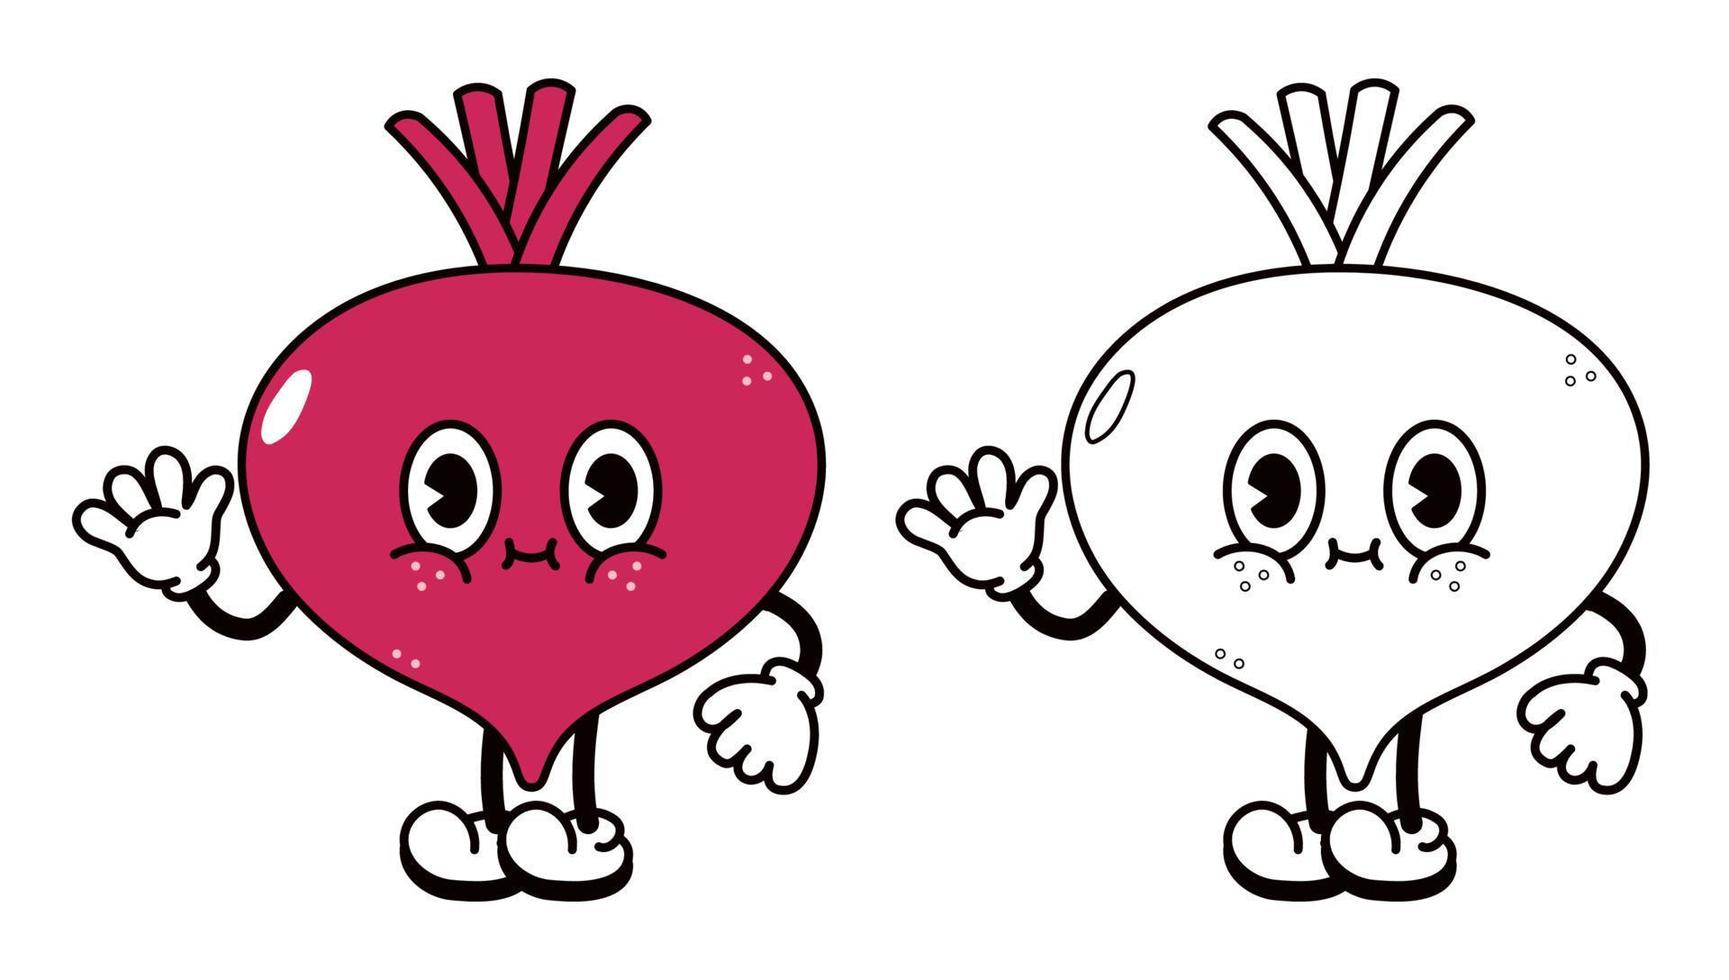 Cute funny beet waving hand character outline cartoon illustration for coloring book. Vector hand drawn traditional cartoon vintage, retro, beet character. Isolated on white background